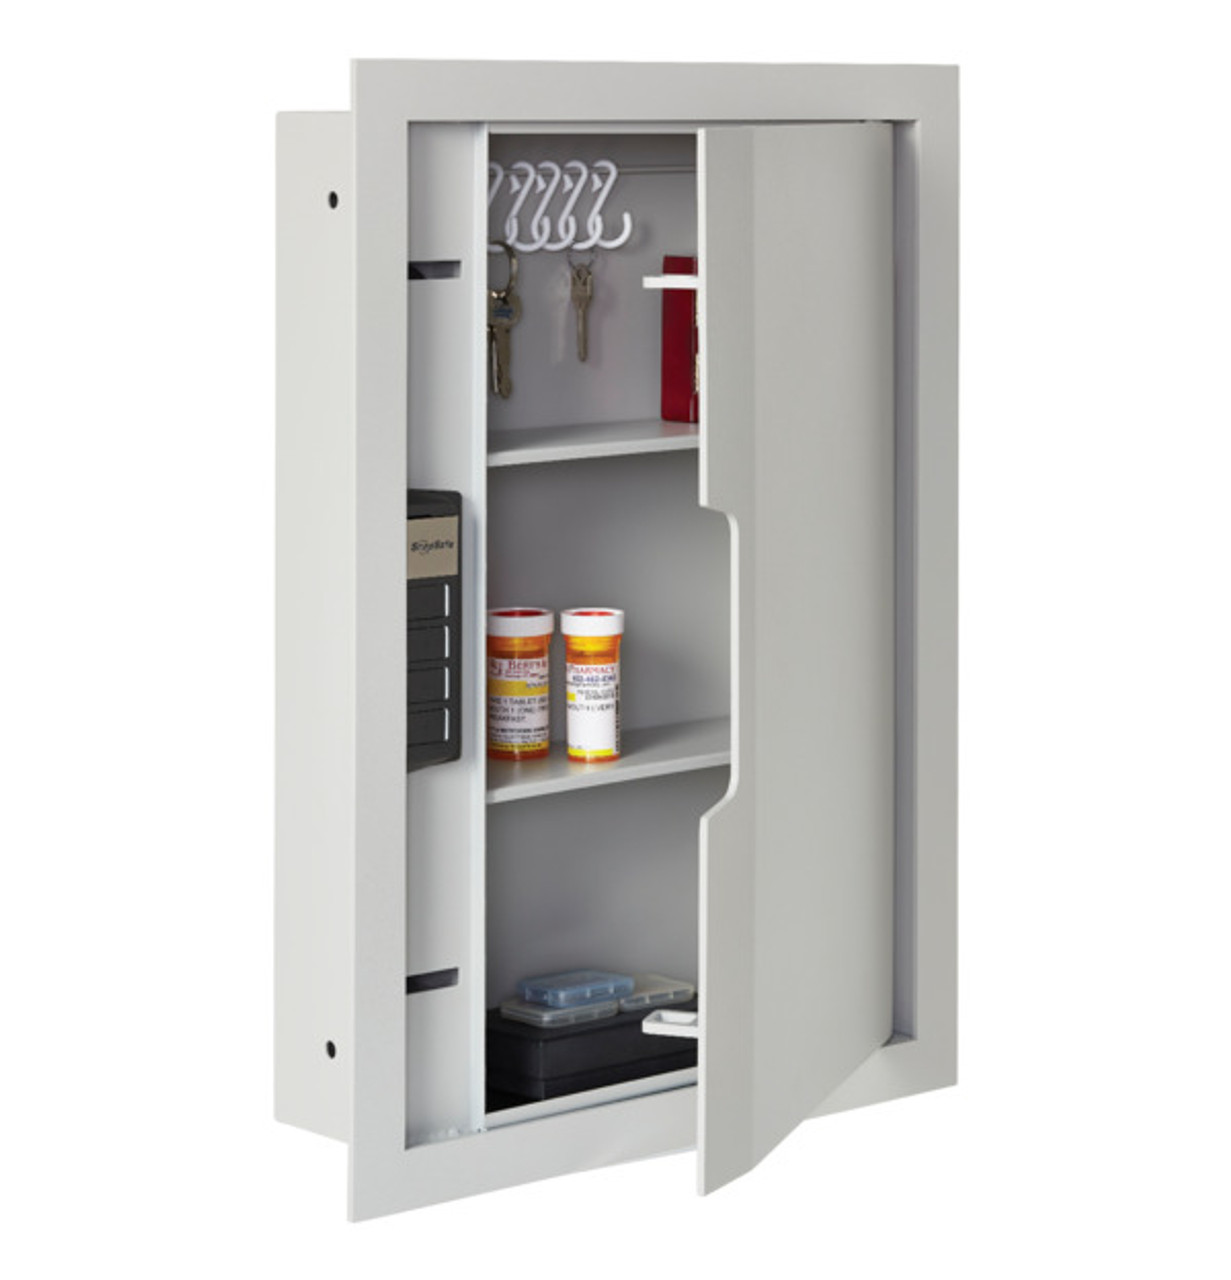 SnapSafe® In-Wall Safes